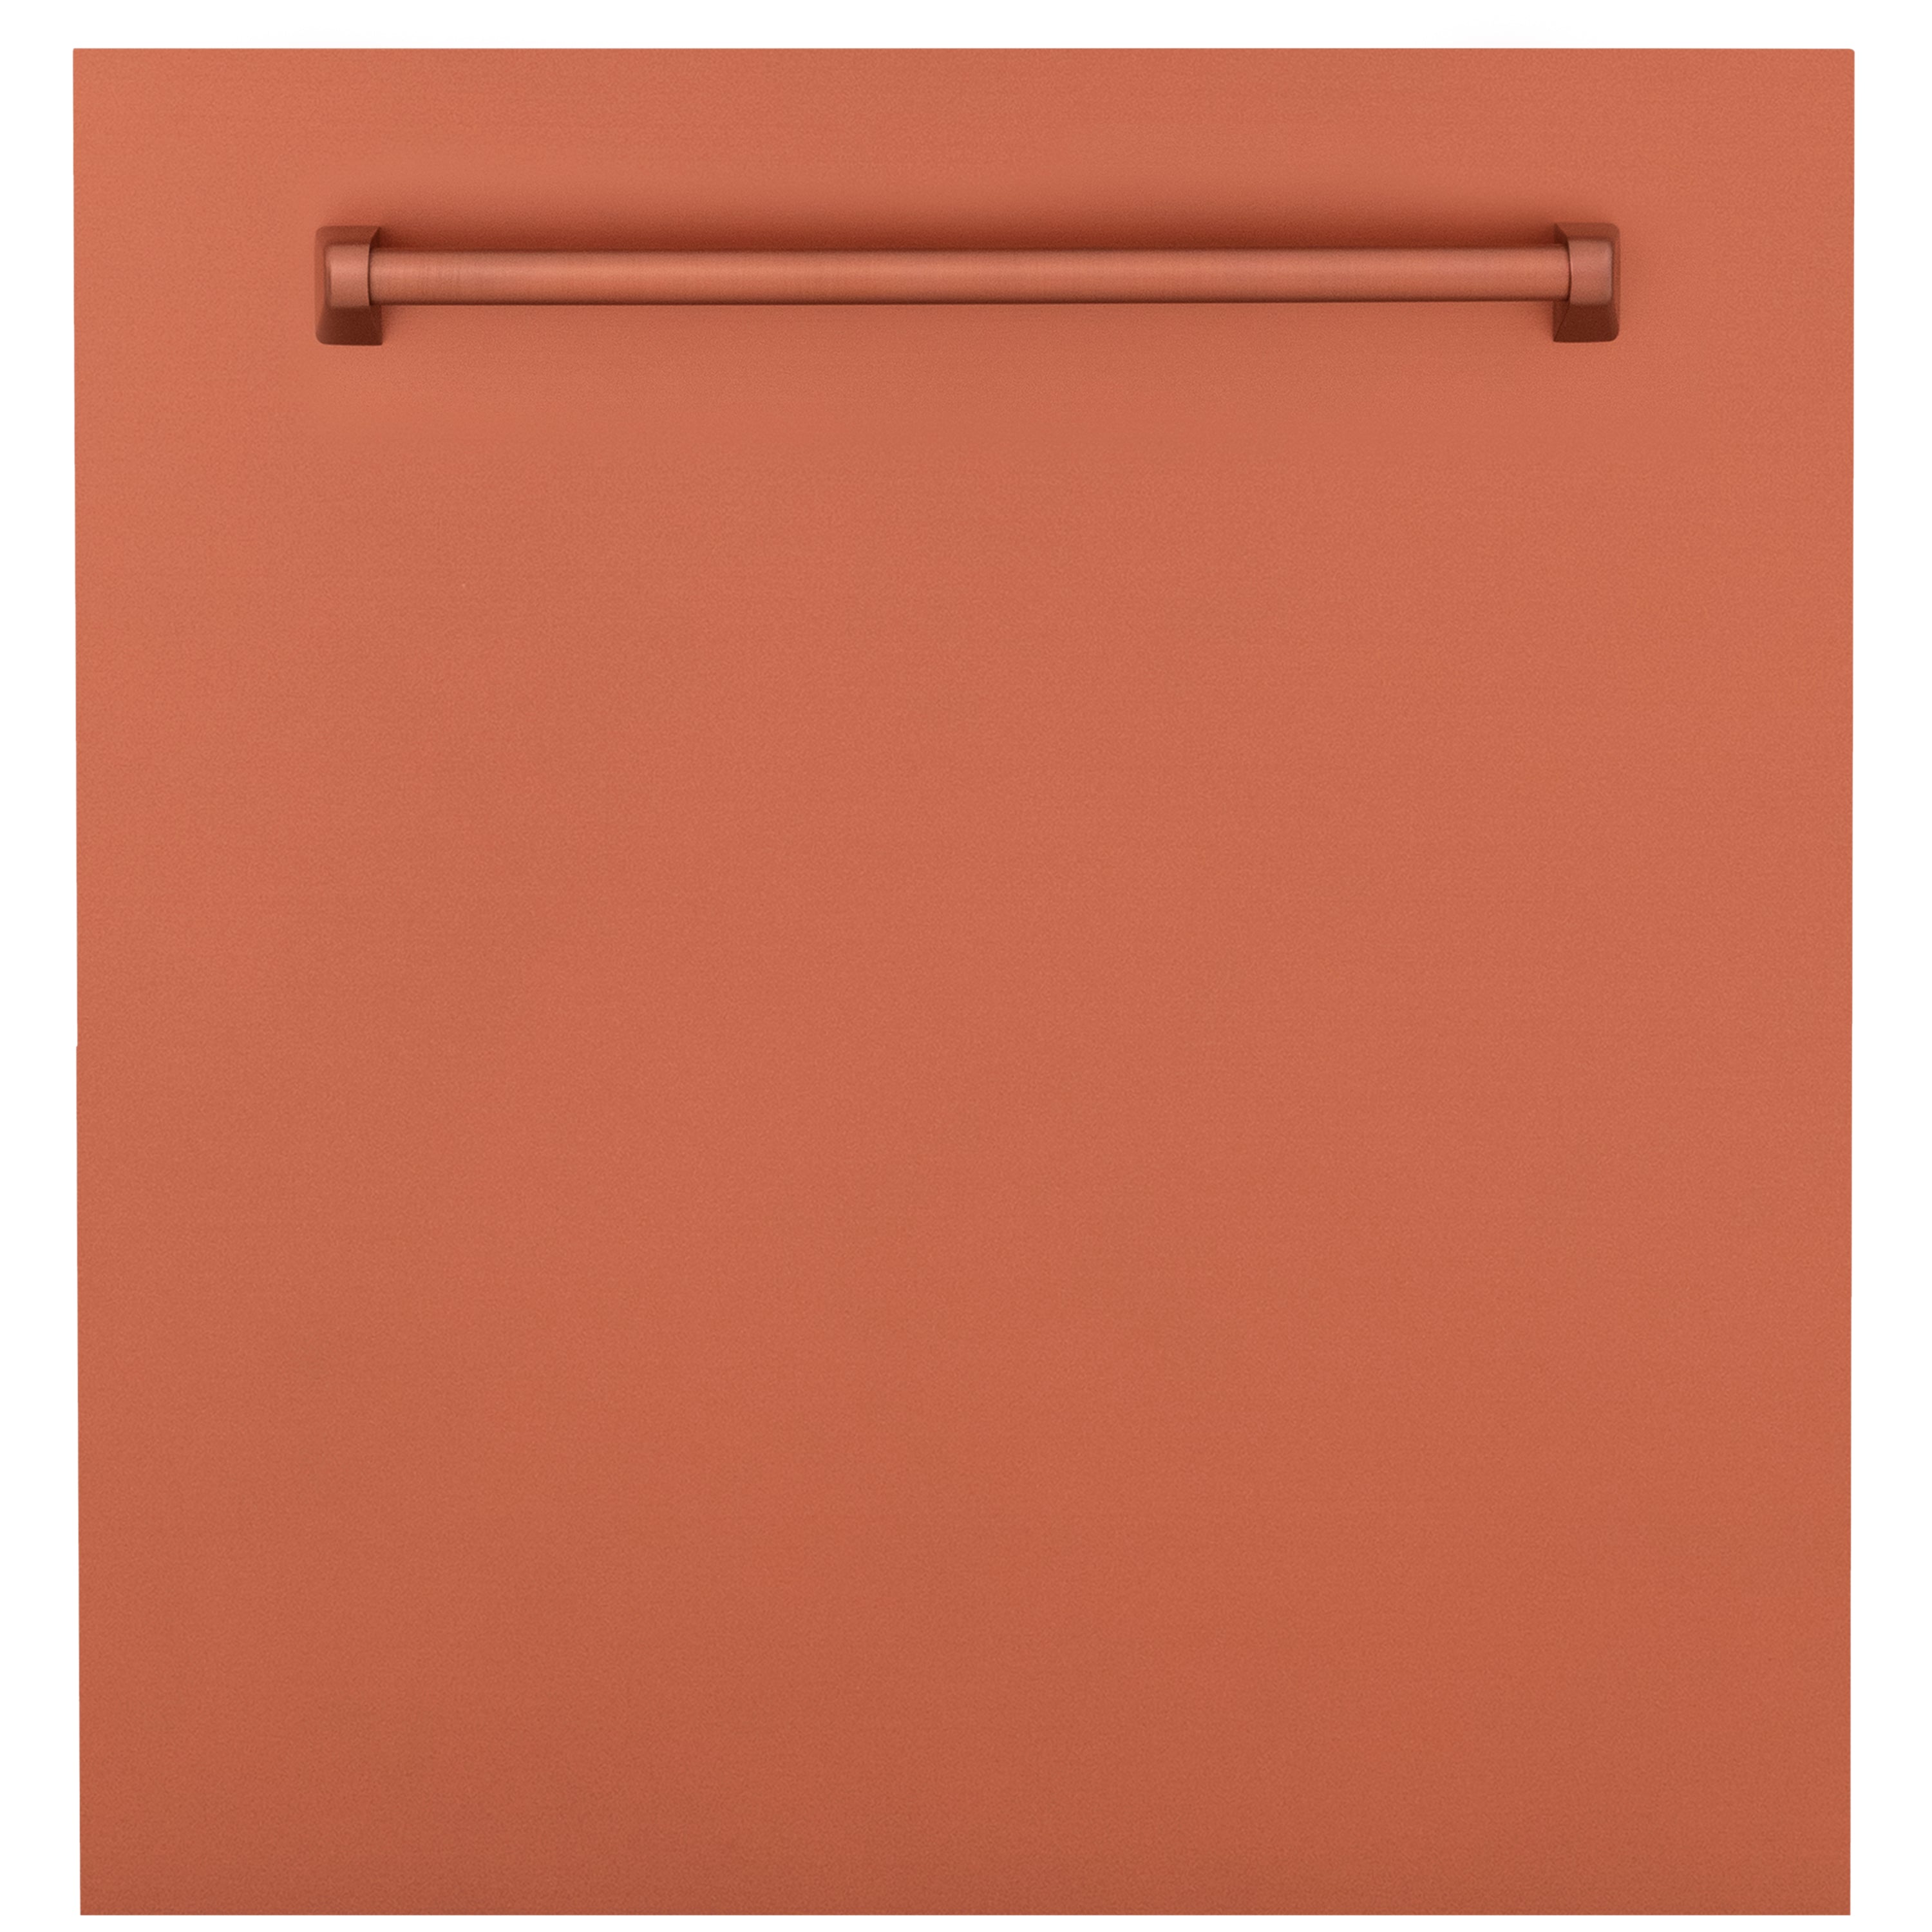 ZLINE 24" Monument Dishwasher Panel in Copper with Traditional Handle (DPMT-C-24)